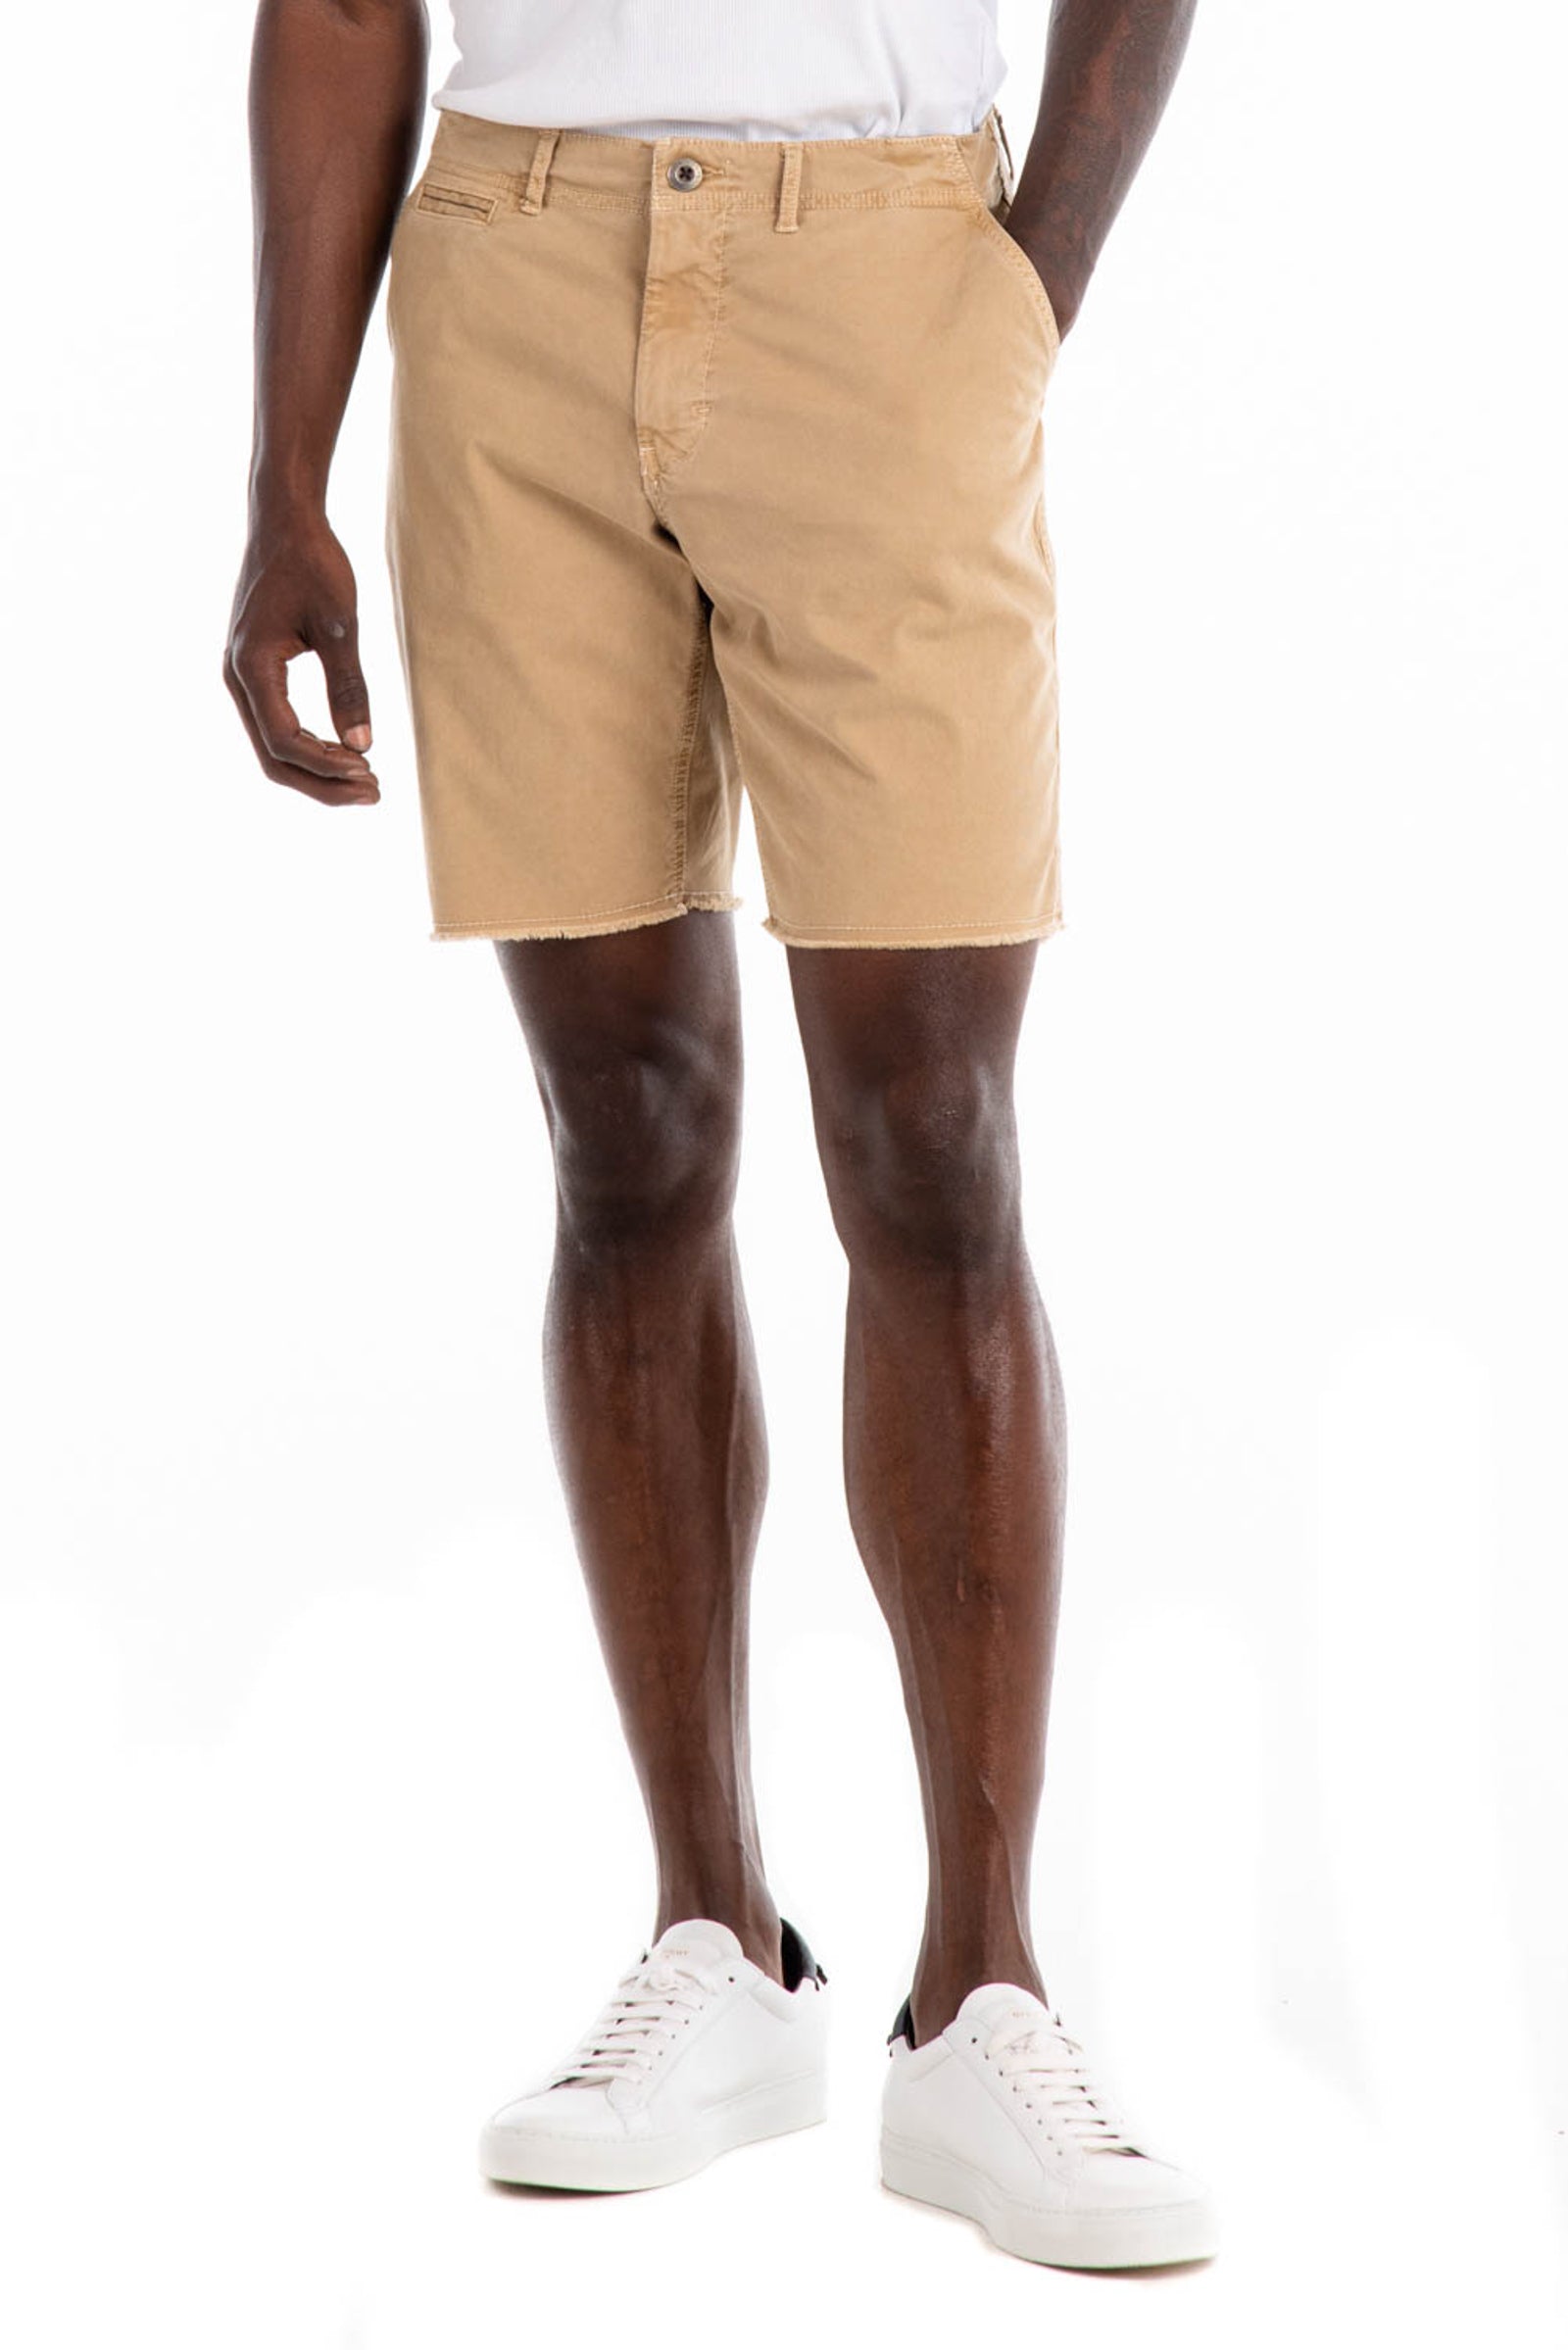 Original Paperbacks Brentwood Chino Short in Khaki on Model Cropped Styled View